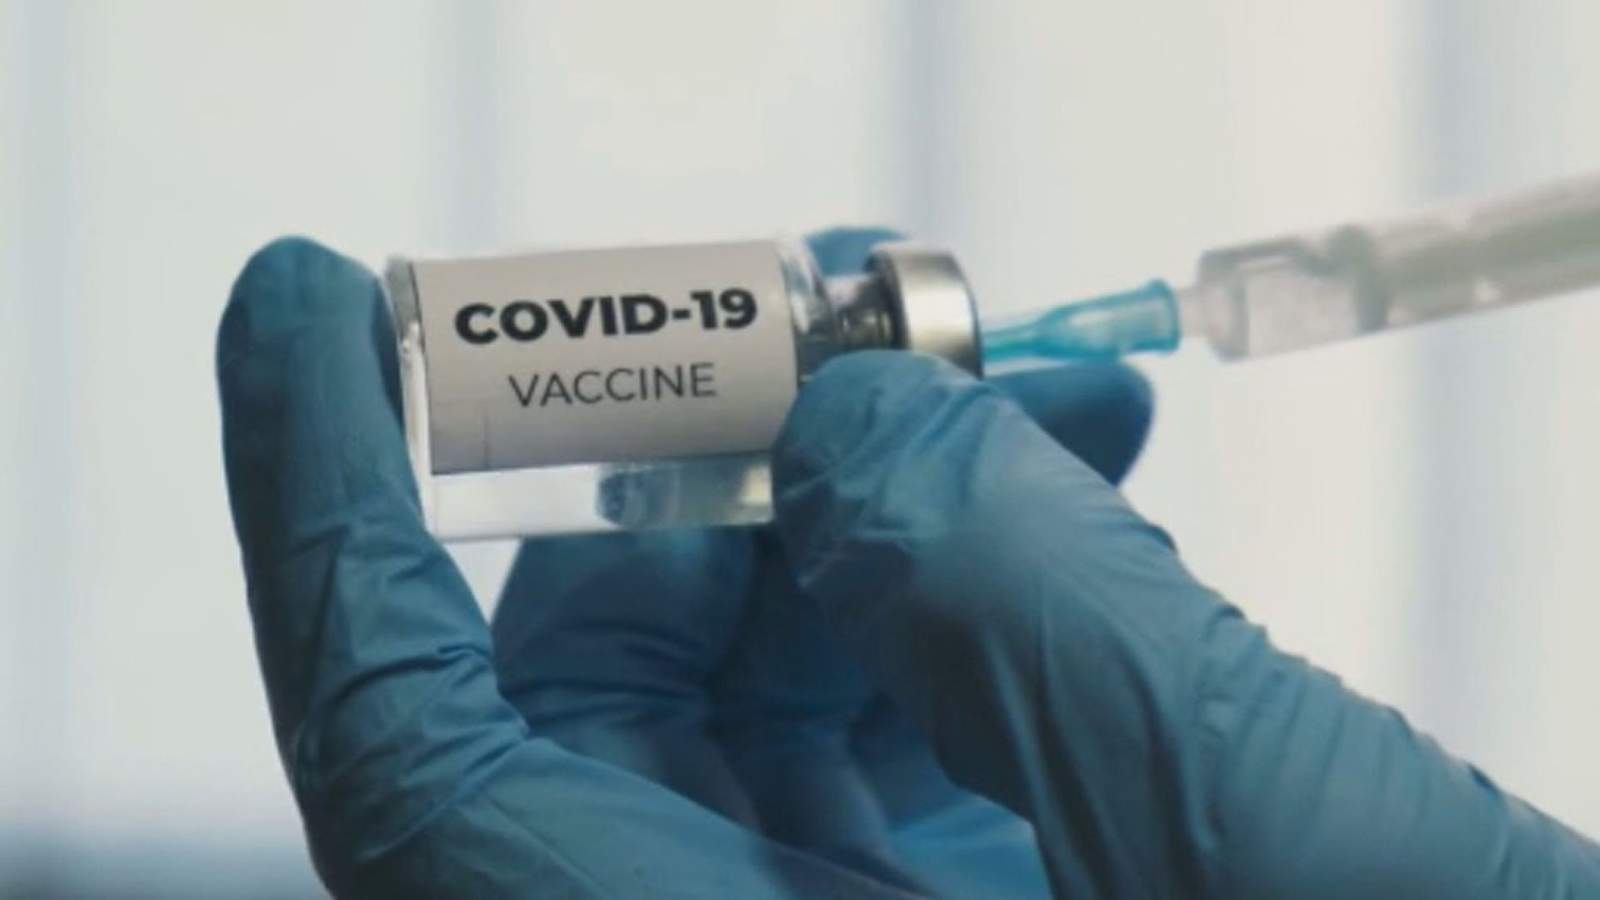 Websites help residents find specific brand of COVID-19 vaccine